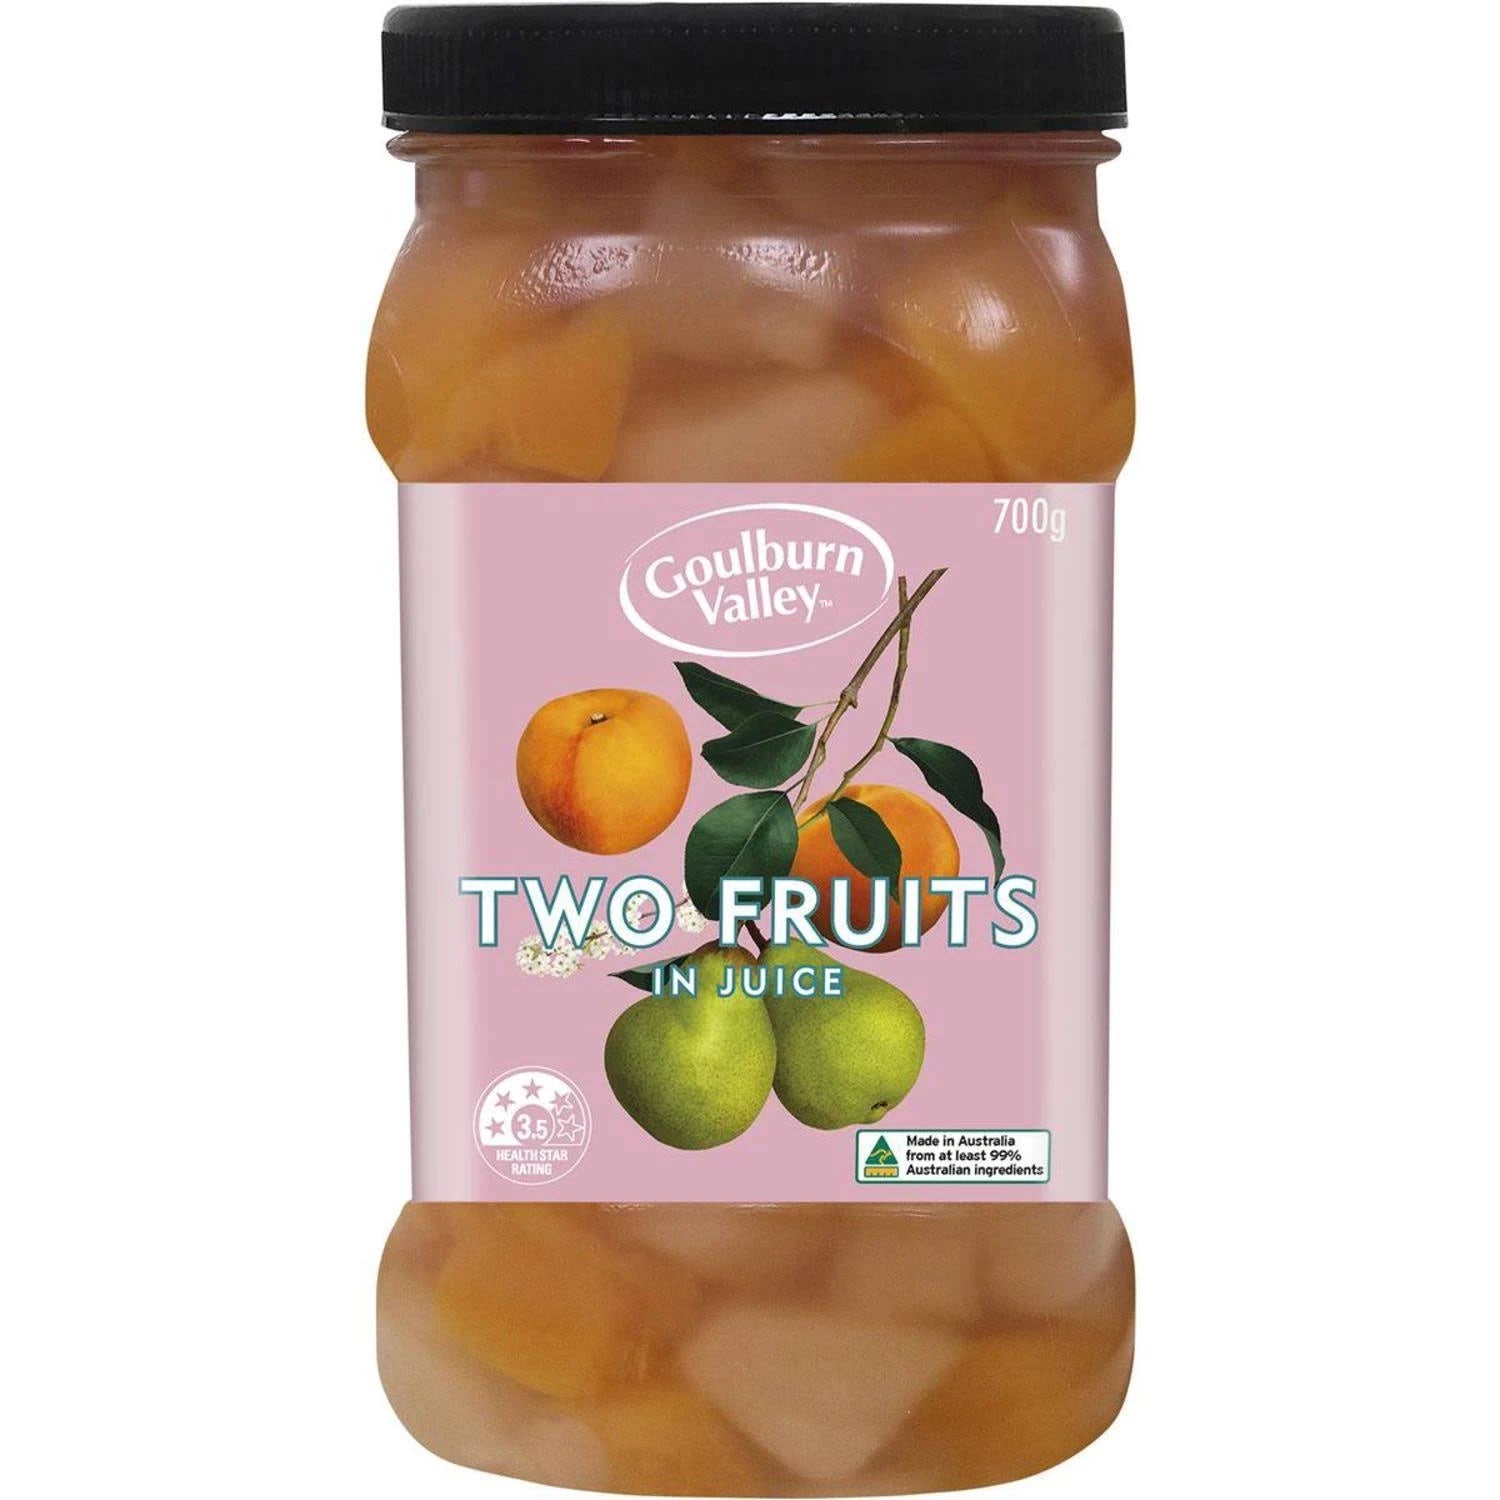 Goulburn Valley Two Fruits In Juice 700g